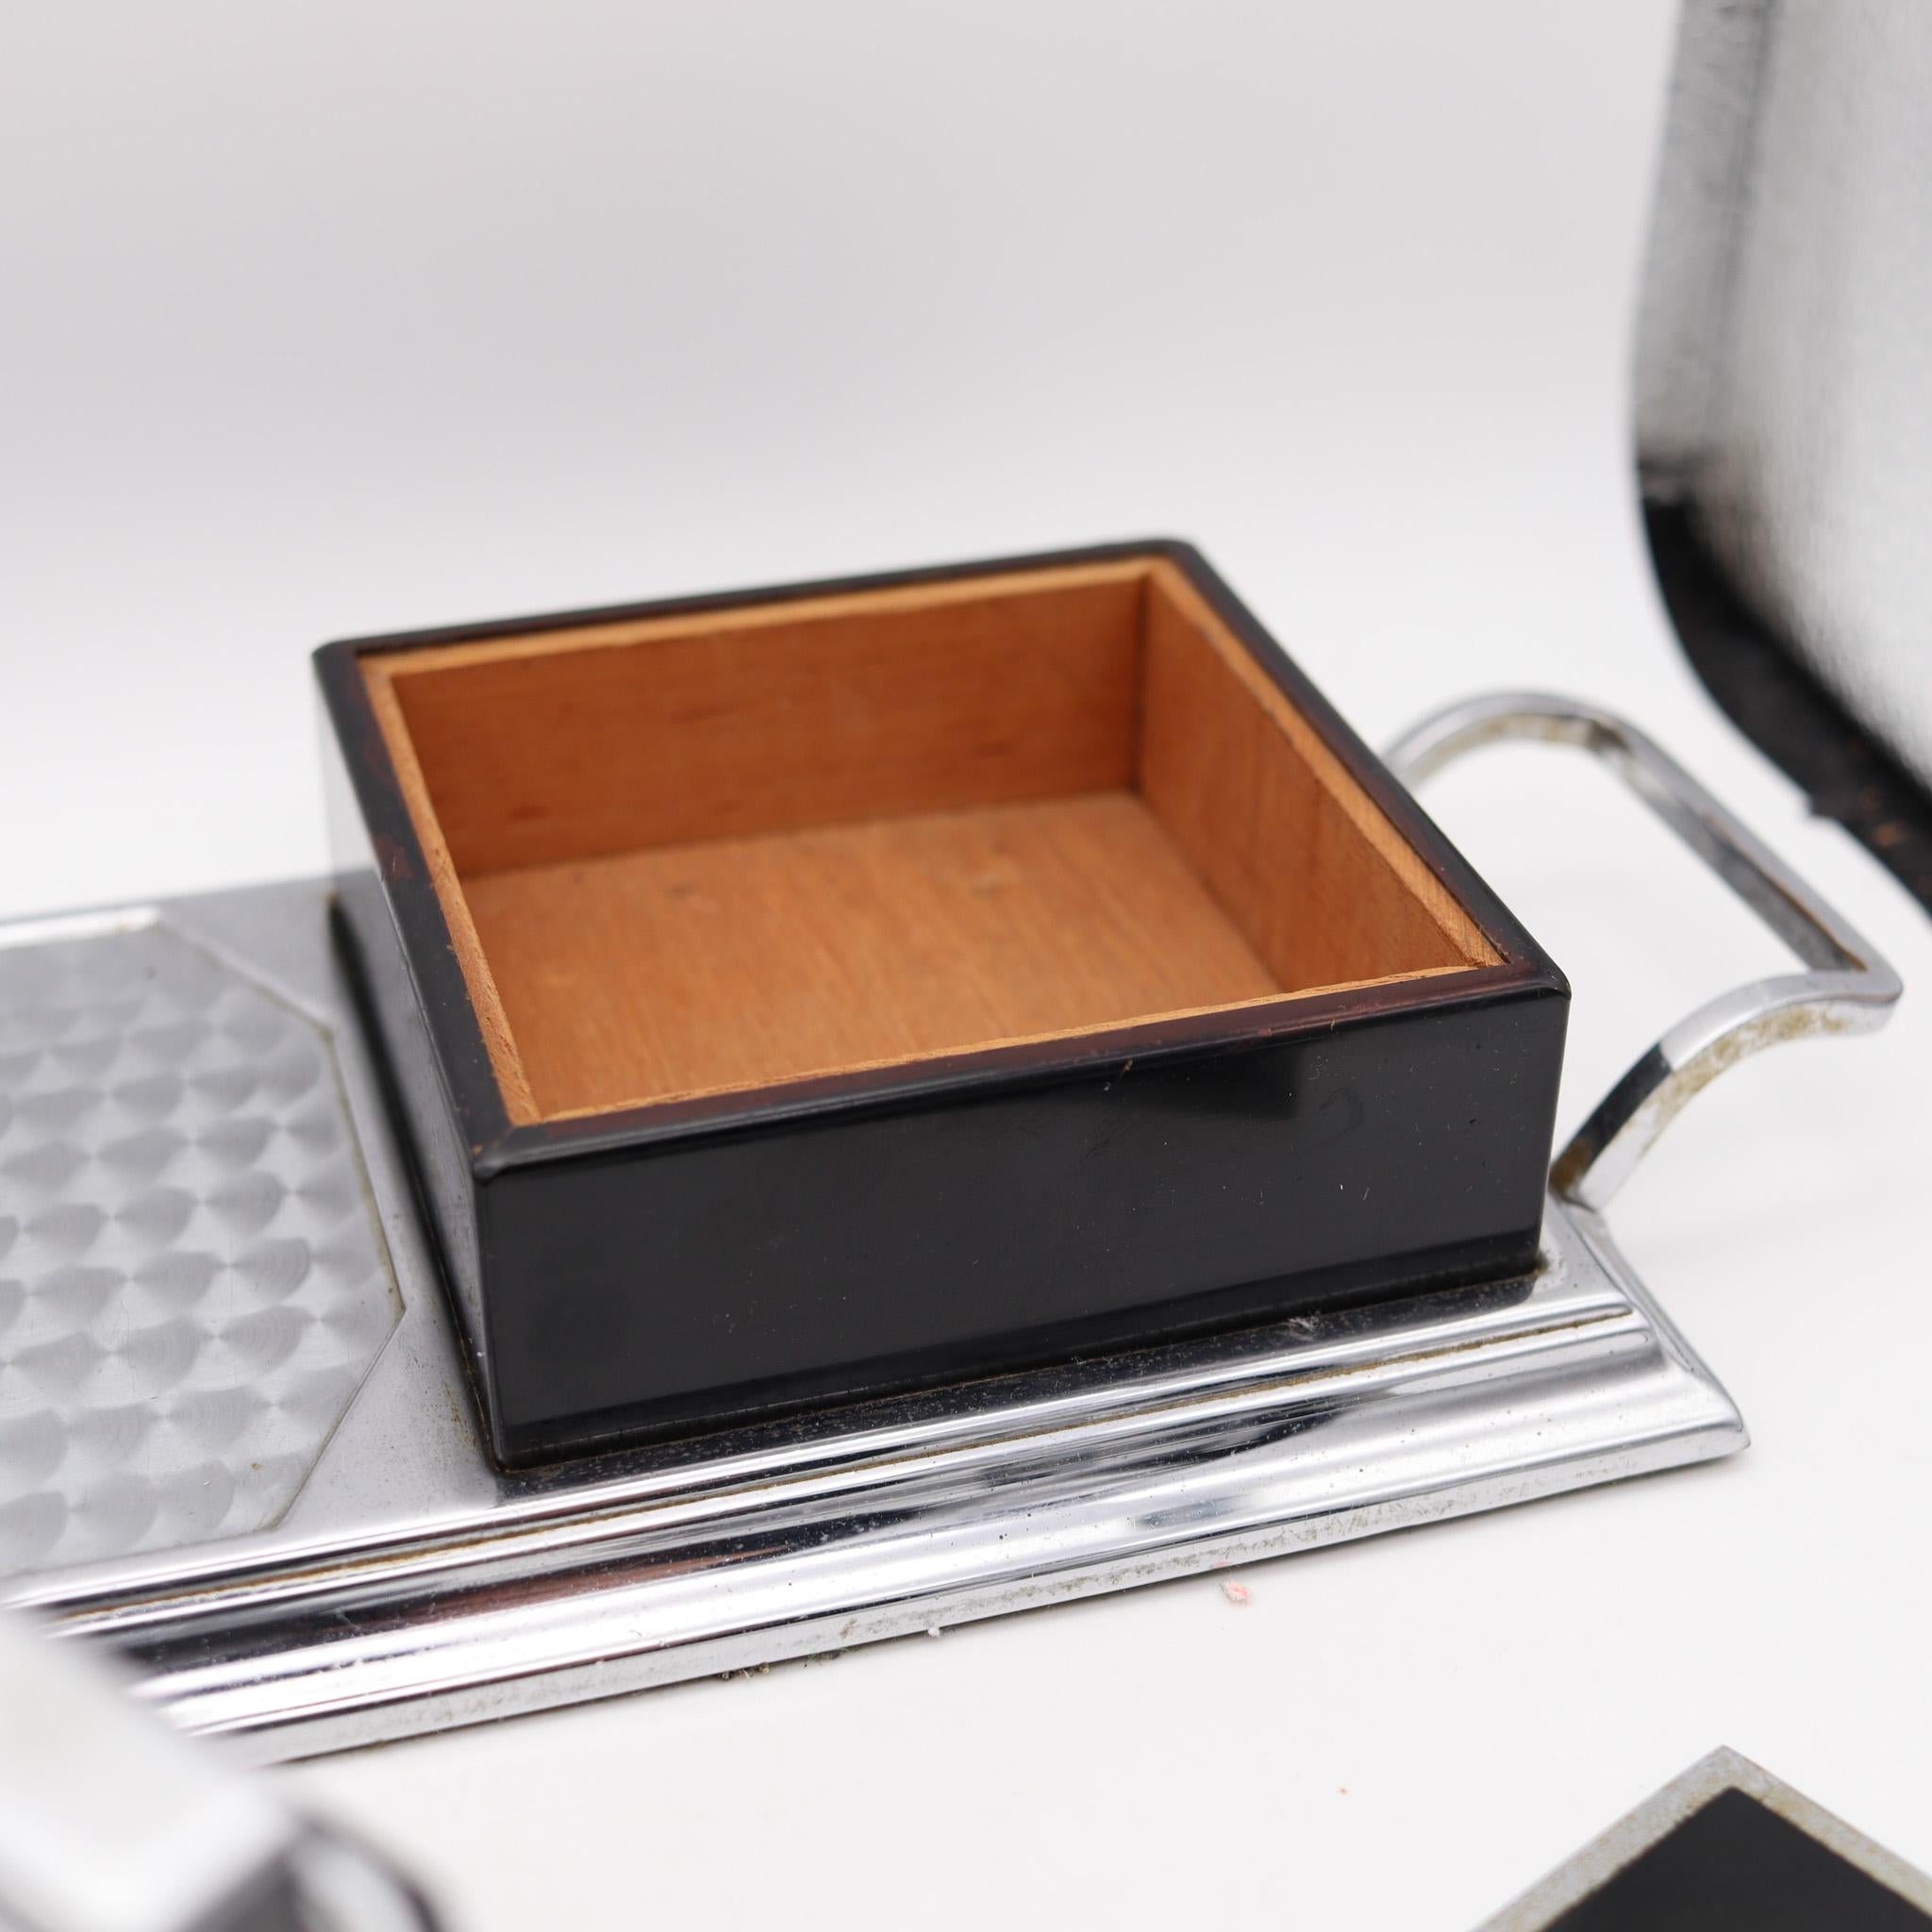 Ronson USA 1935 Art Deco Black Lacquered Desk Box With Octette Touch Tip Lighter In Excellent Condition For Sale In Miami, FL